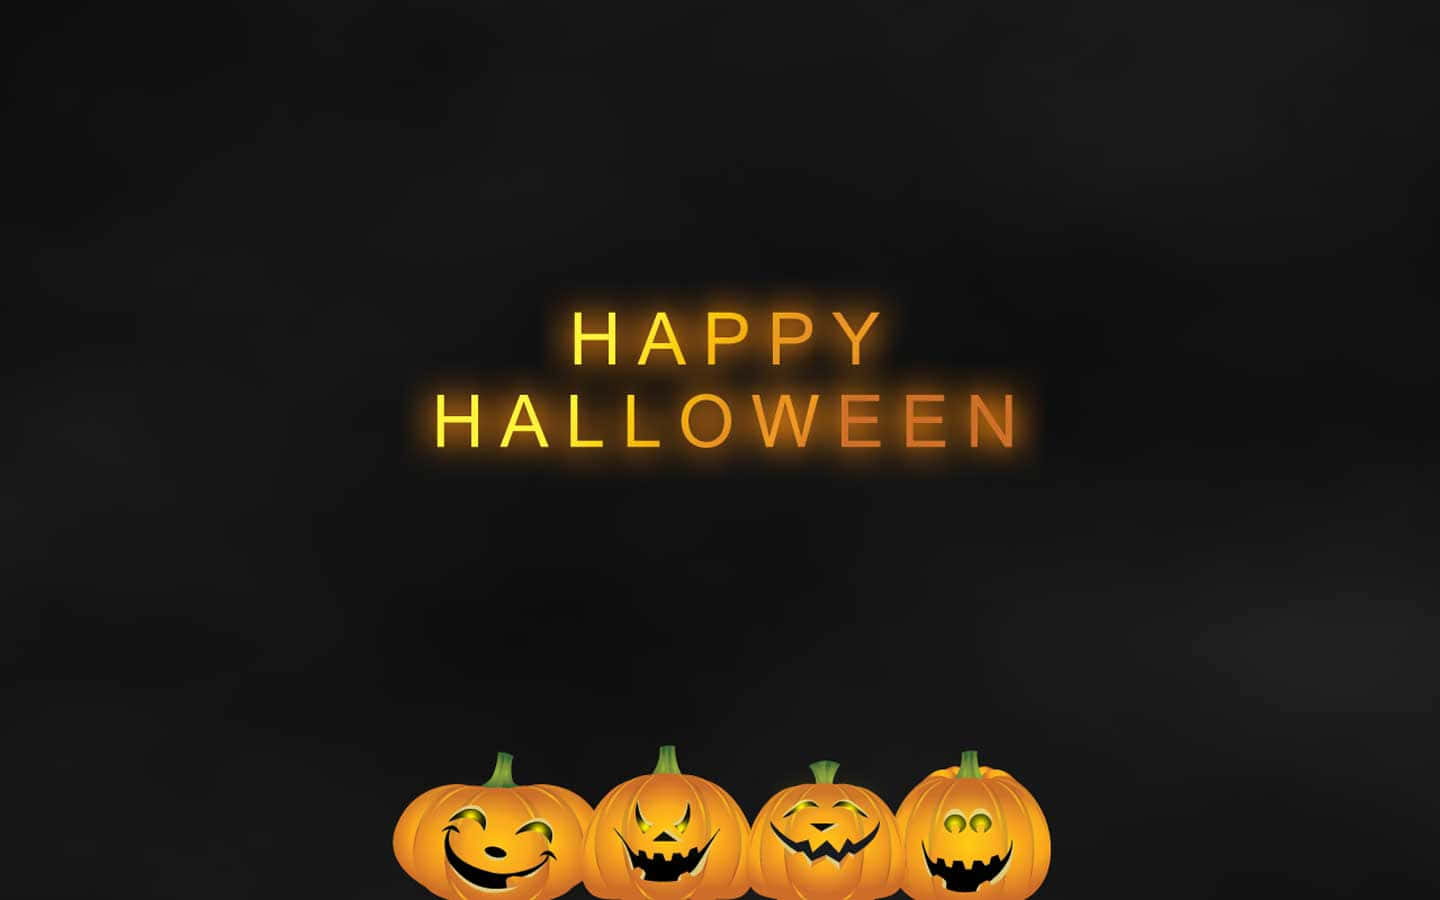 Spooky and Fun Happy Halloween Background